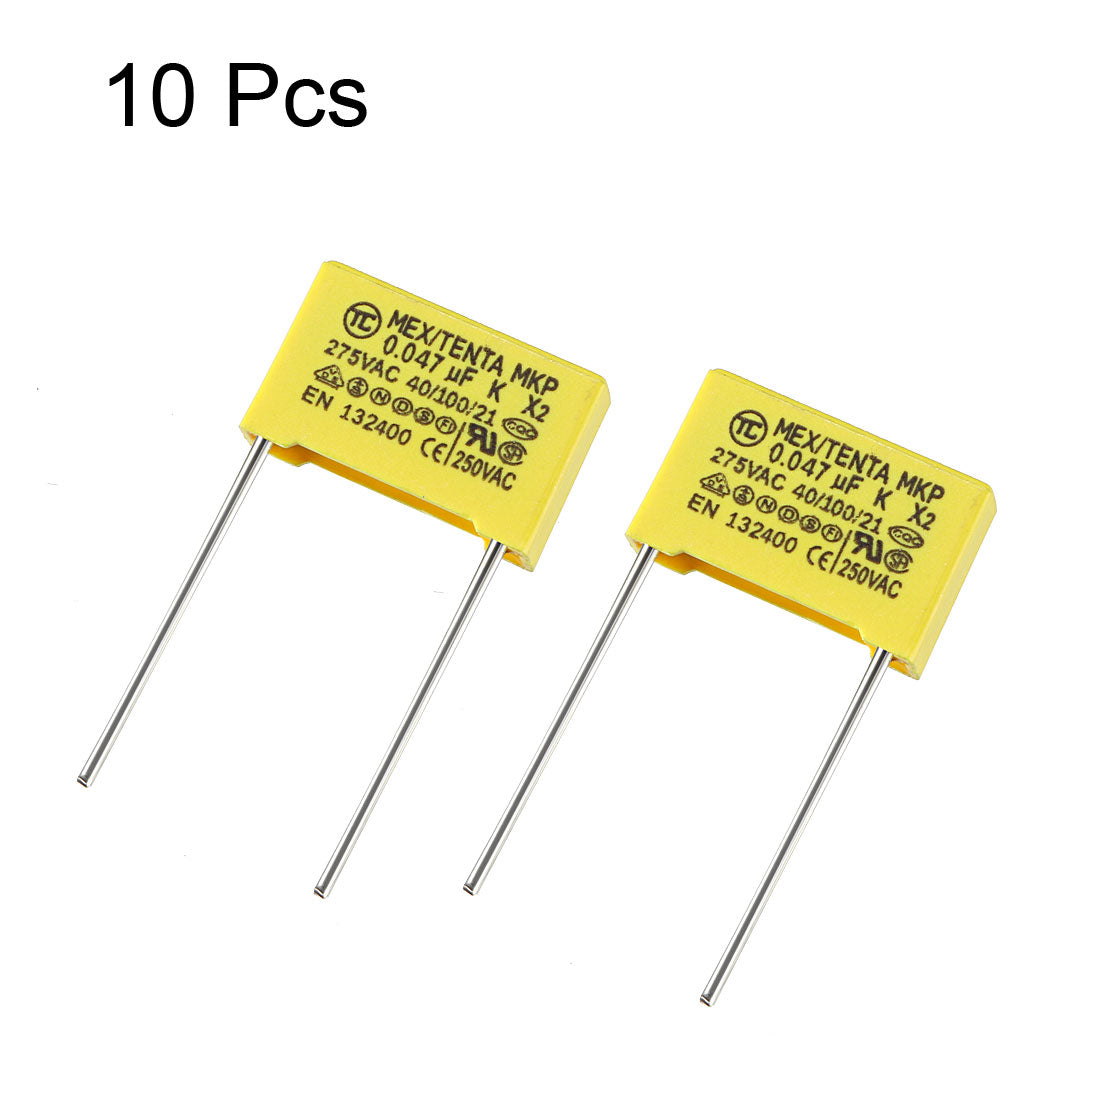 uxcell Uxcell Safety Capacitors Polypropylene Film 0.047uF 275VAC X2 MKP 13.5mm Pin Pitch 10 Pcs